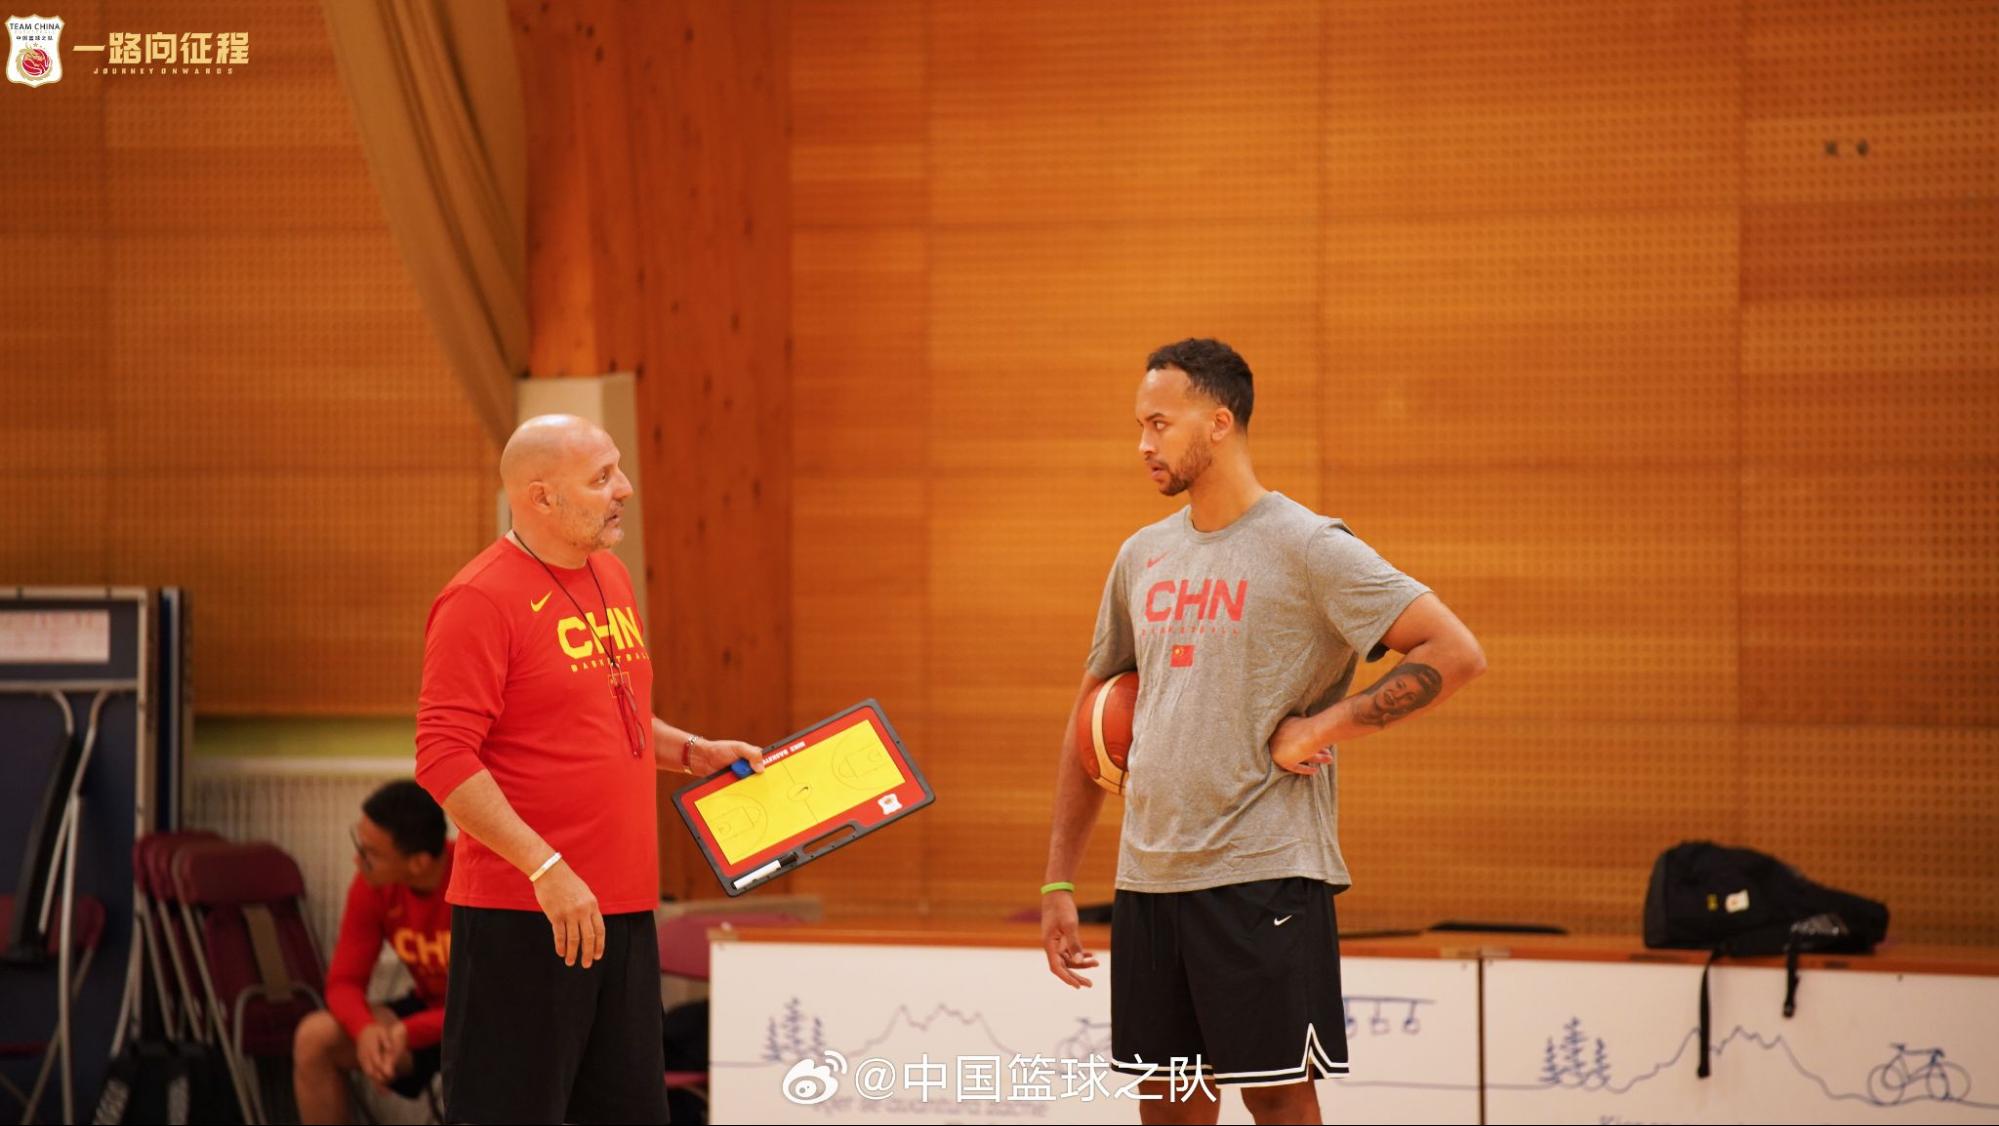 NBA Player Born In New York Has Obtained Chinese Citizenship - The